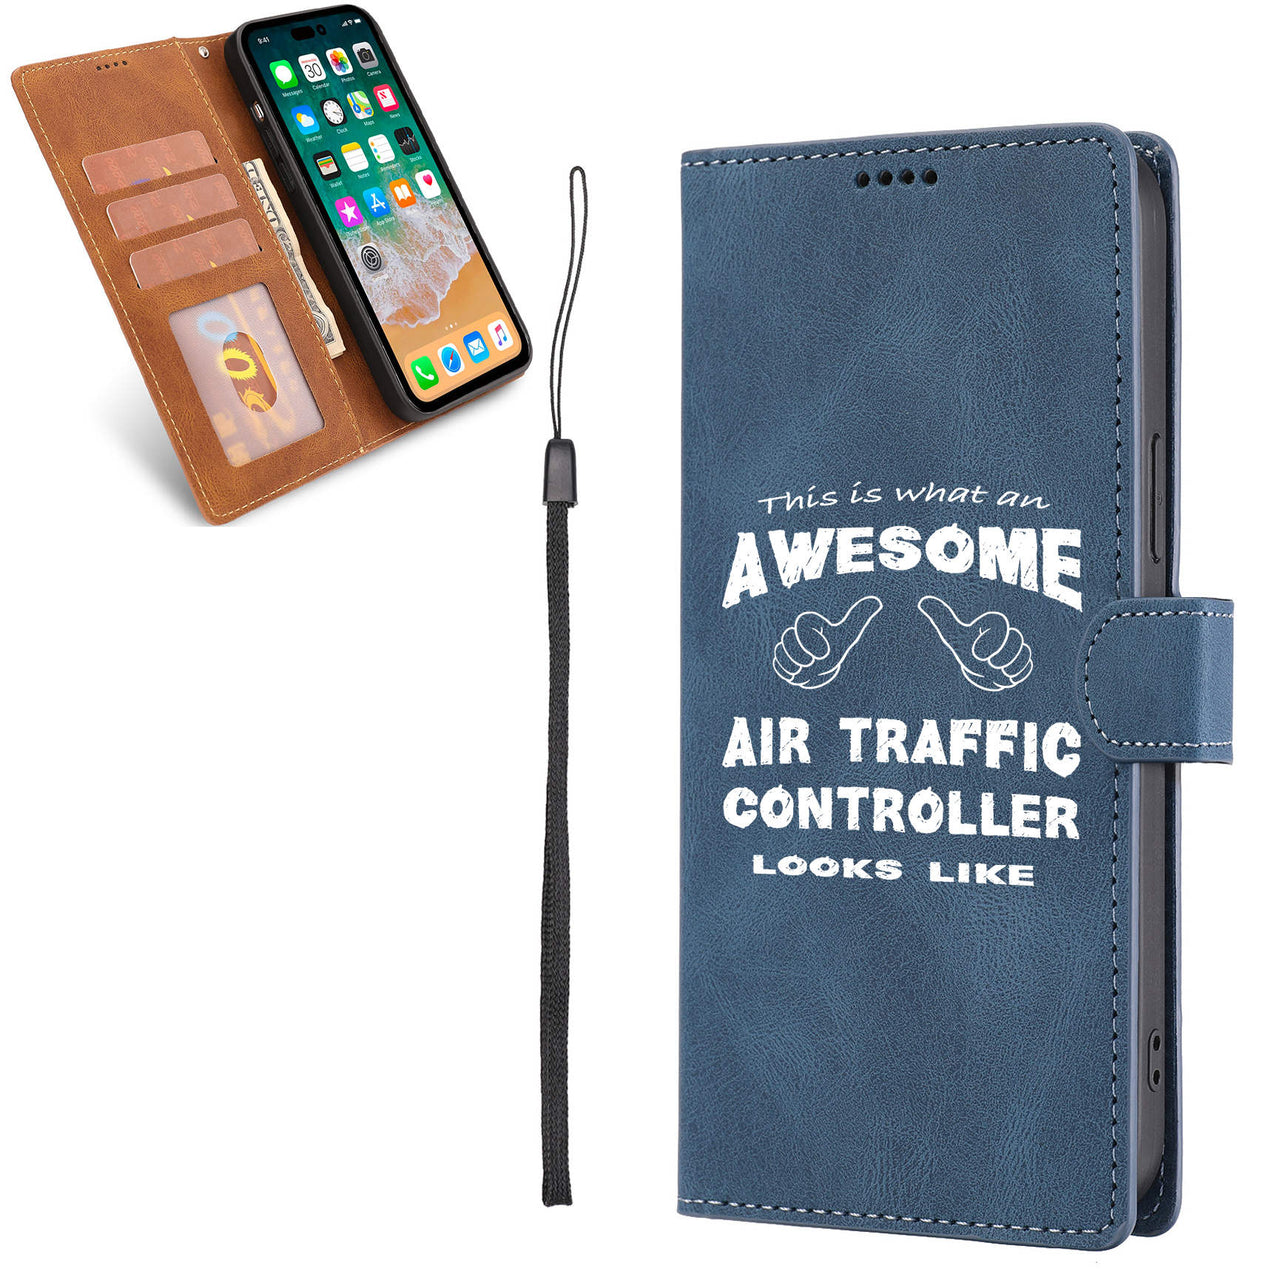 Air Traffic Controller Designed Leather iPhone Cases